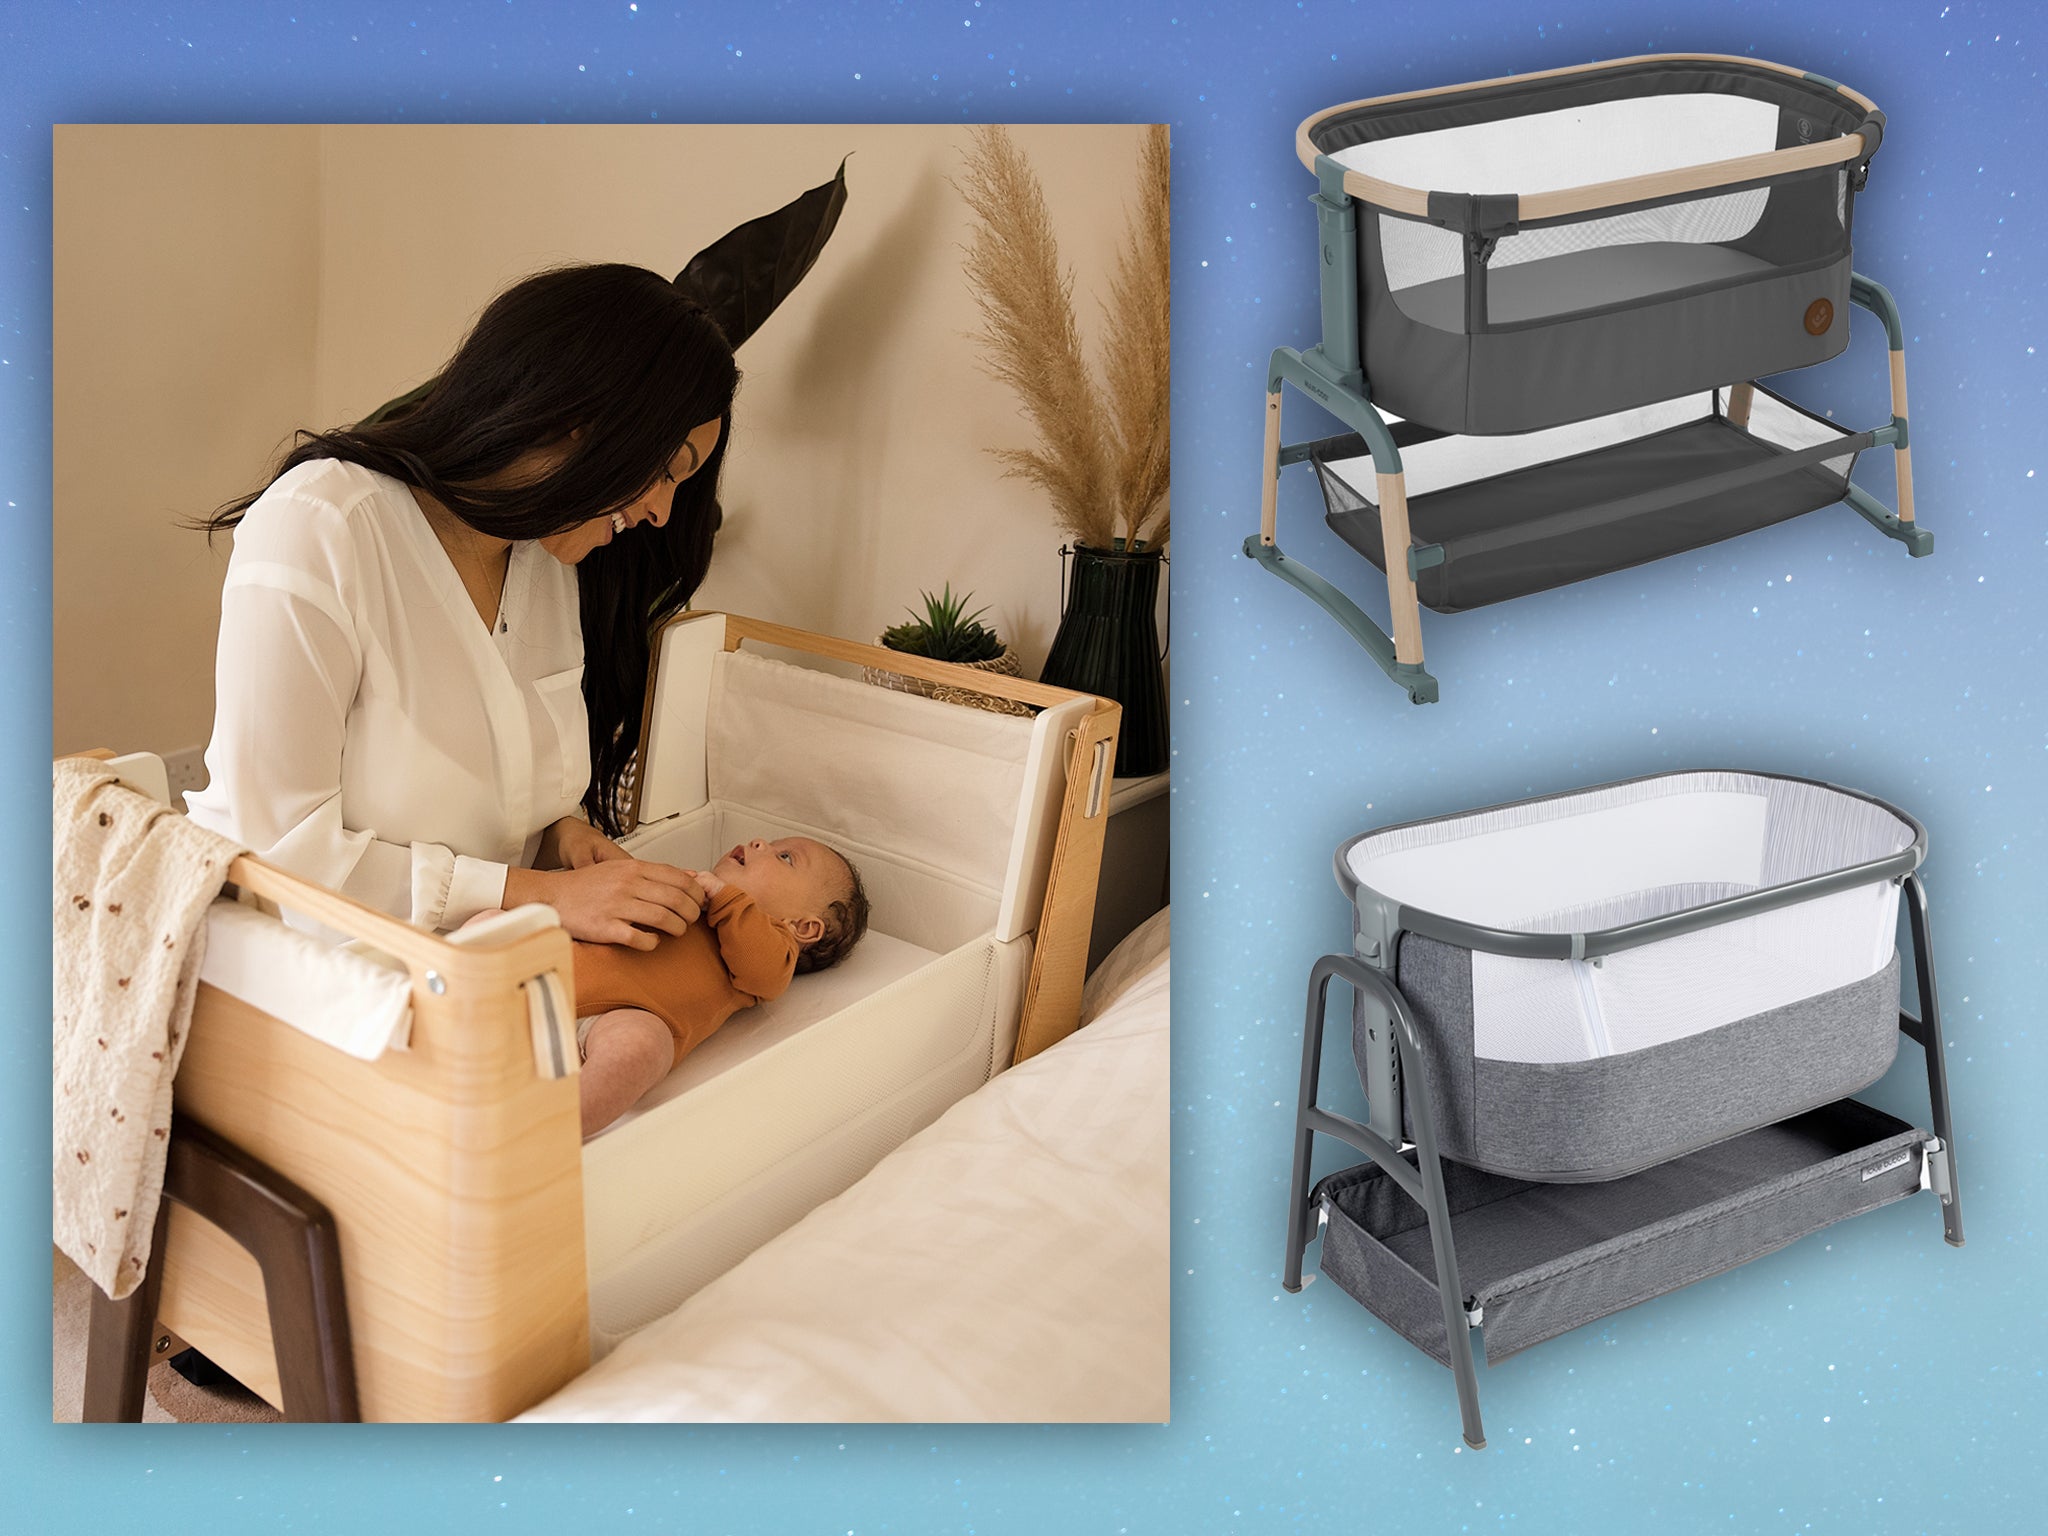 Sample and Sleep in Pure Comfort - Powered By Mom